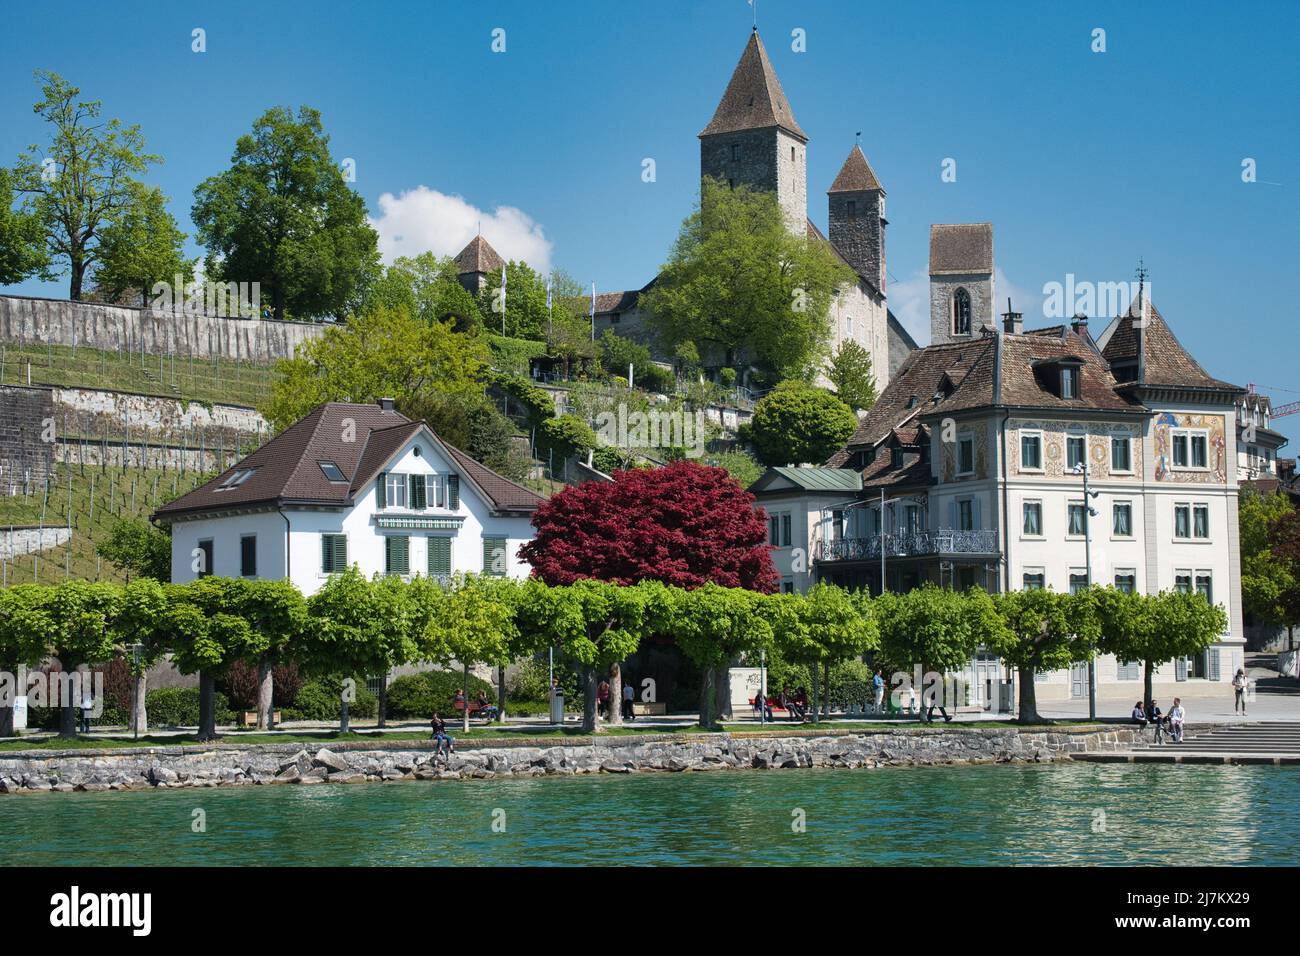 RAPPERSWIL JONA CASTLE ABOVE HOUSES AND VINEYARDS ON THE SIDE OF LAKE ZURICH, SWITZERLAND Stock Photo